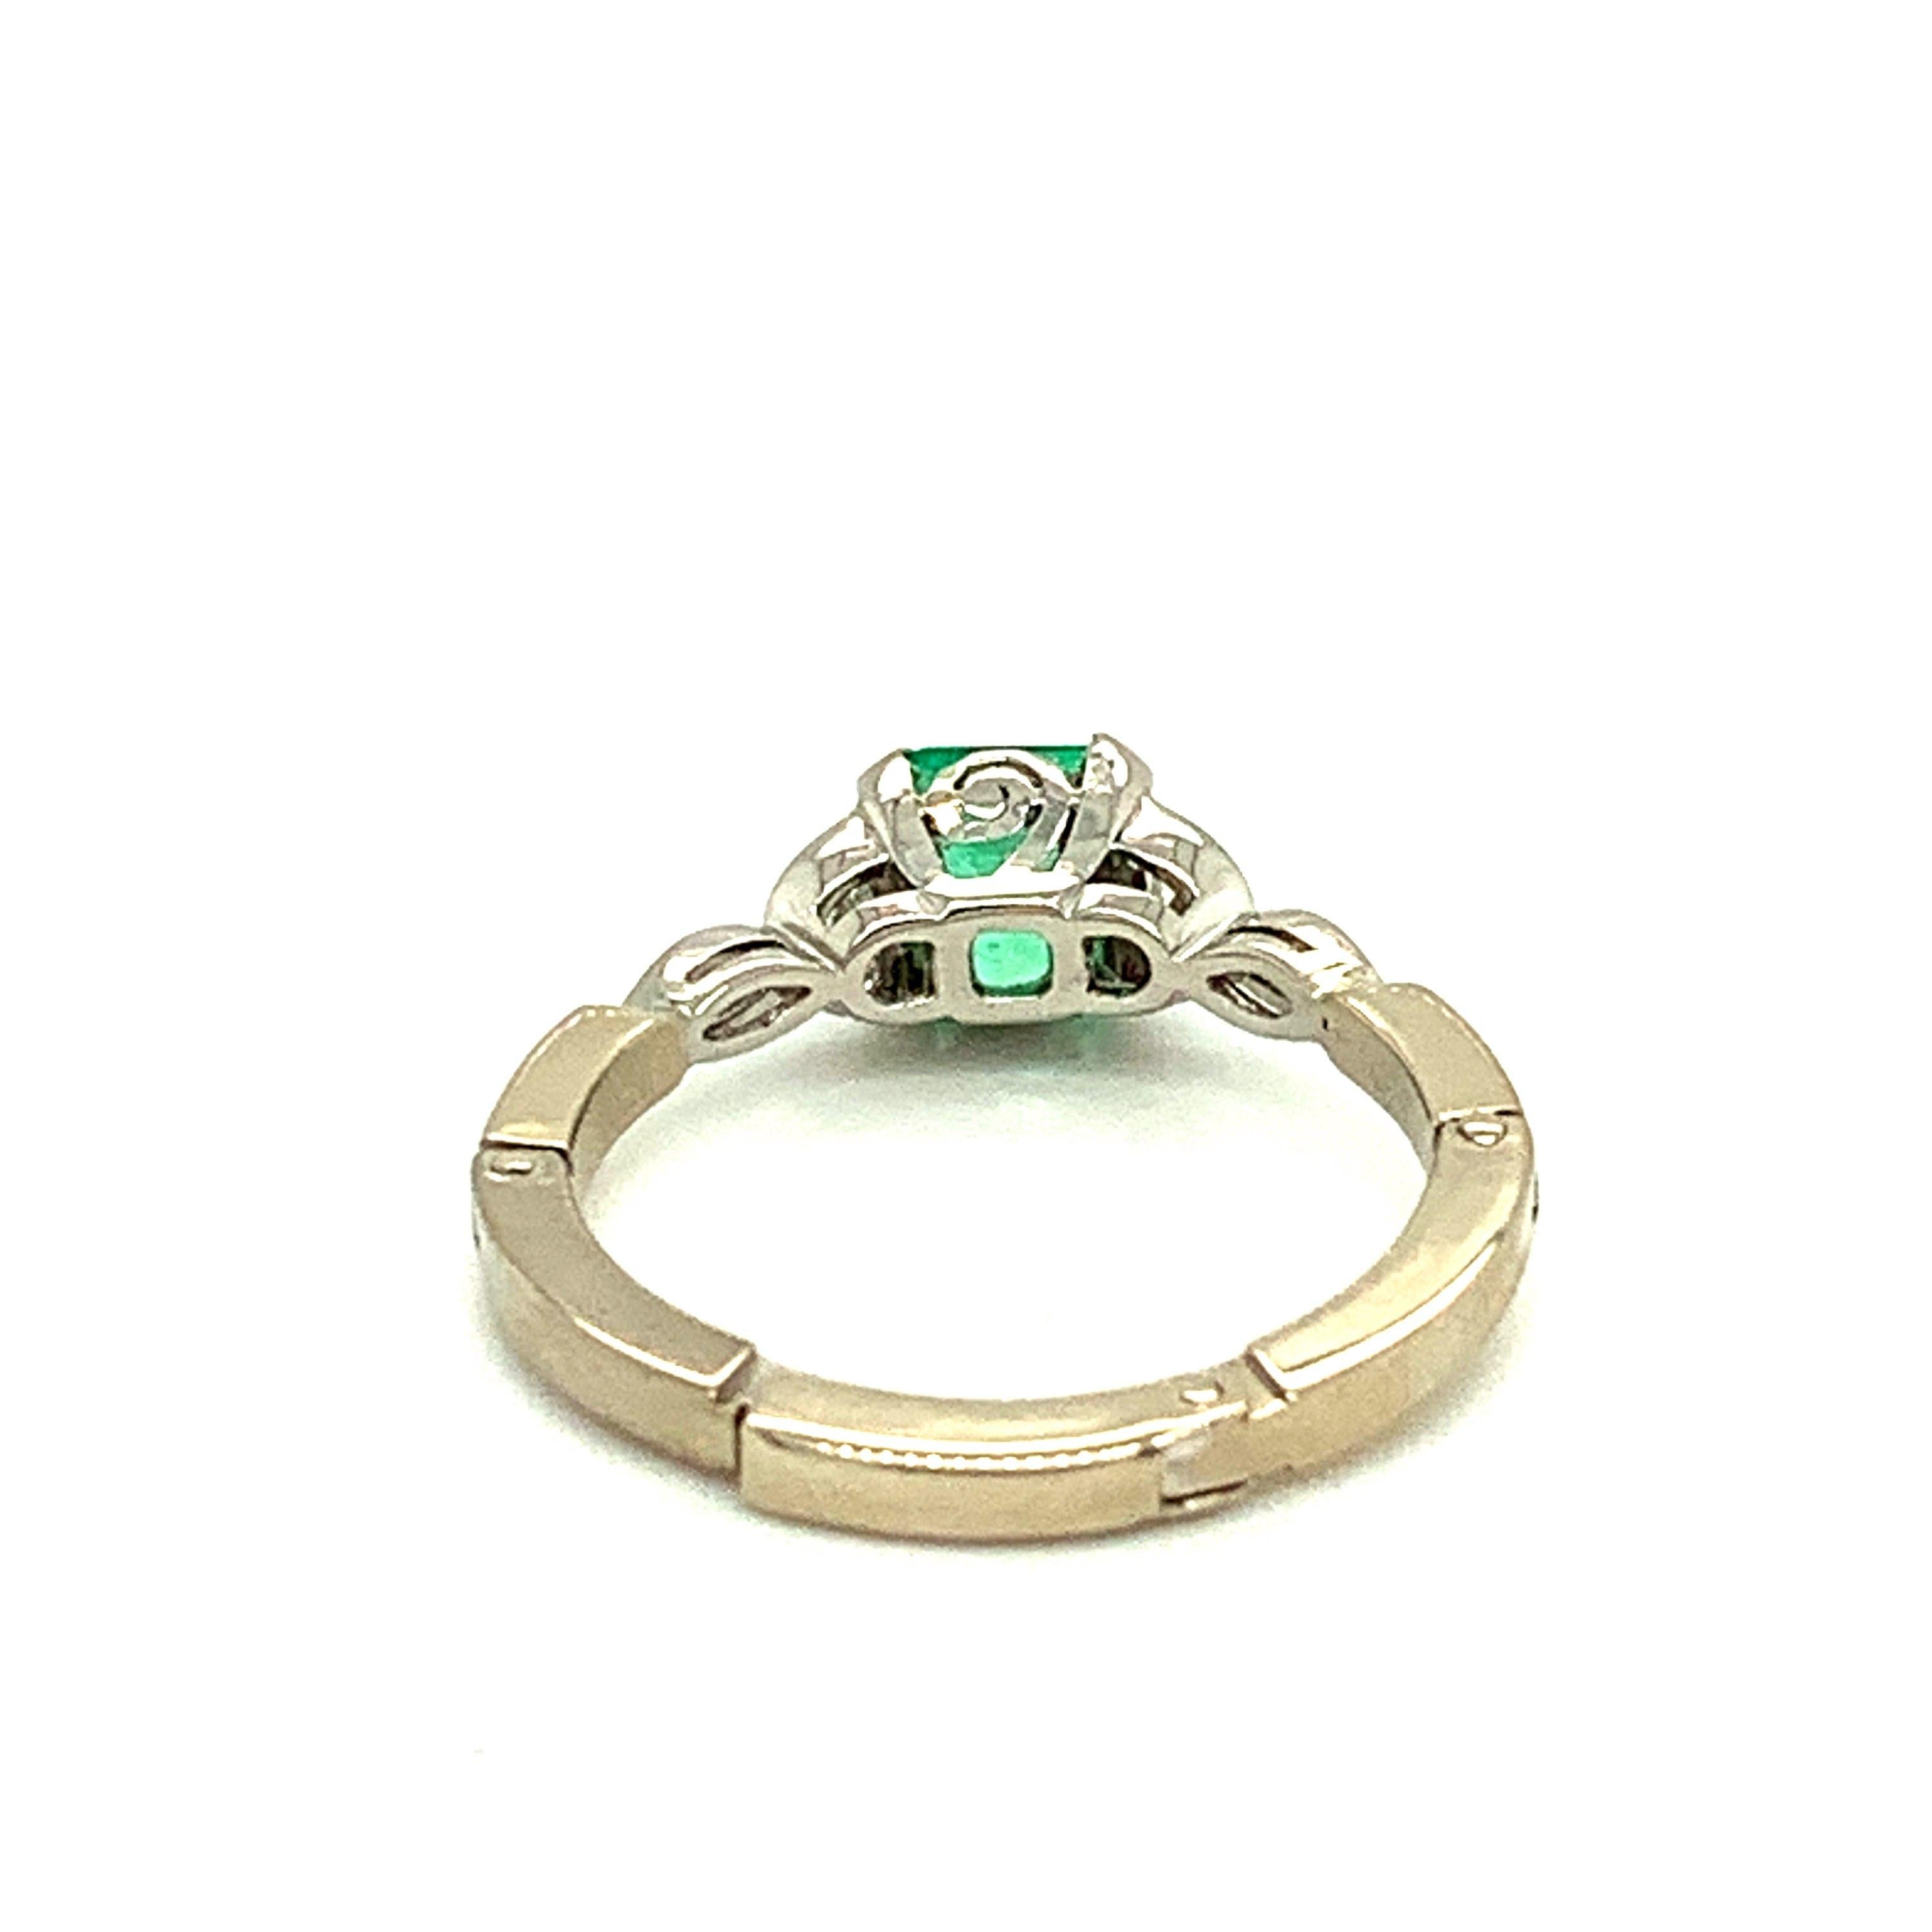 Platinum 14k Gold .81ct Genuine Natural Emerald and Diamond Ring (#J4798)

Emerald and diamond ring featuring a bright grass green emerald weighing .81cts and measuring about 5mm square. The emerald is accented by a pair of half moon diamonds